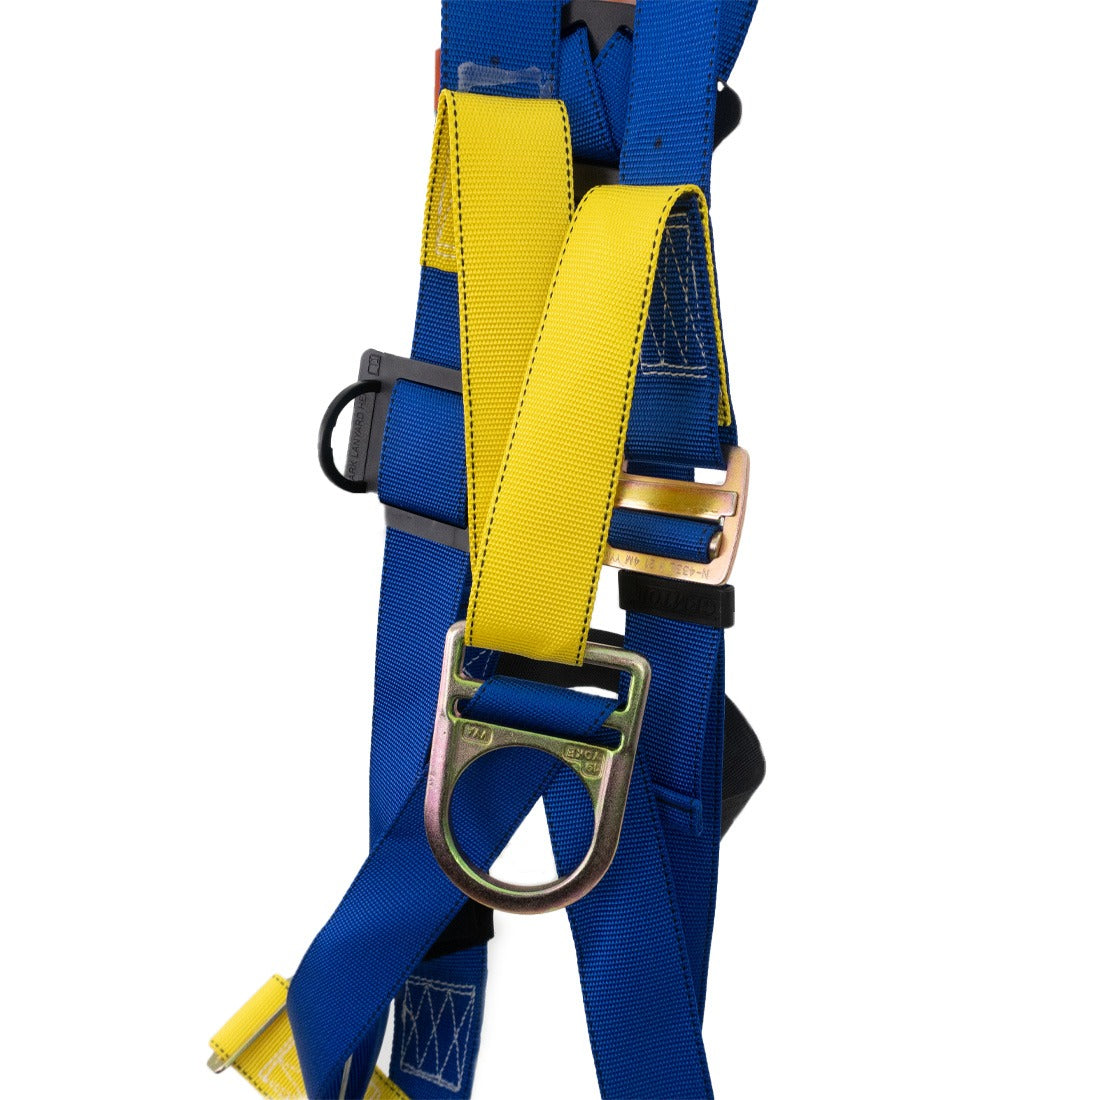 Buy wholesale Endurance Harness - Blue / Small (Carabiner Clip)